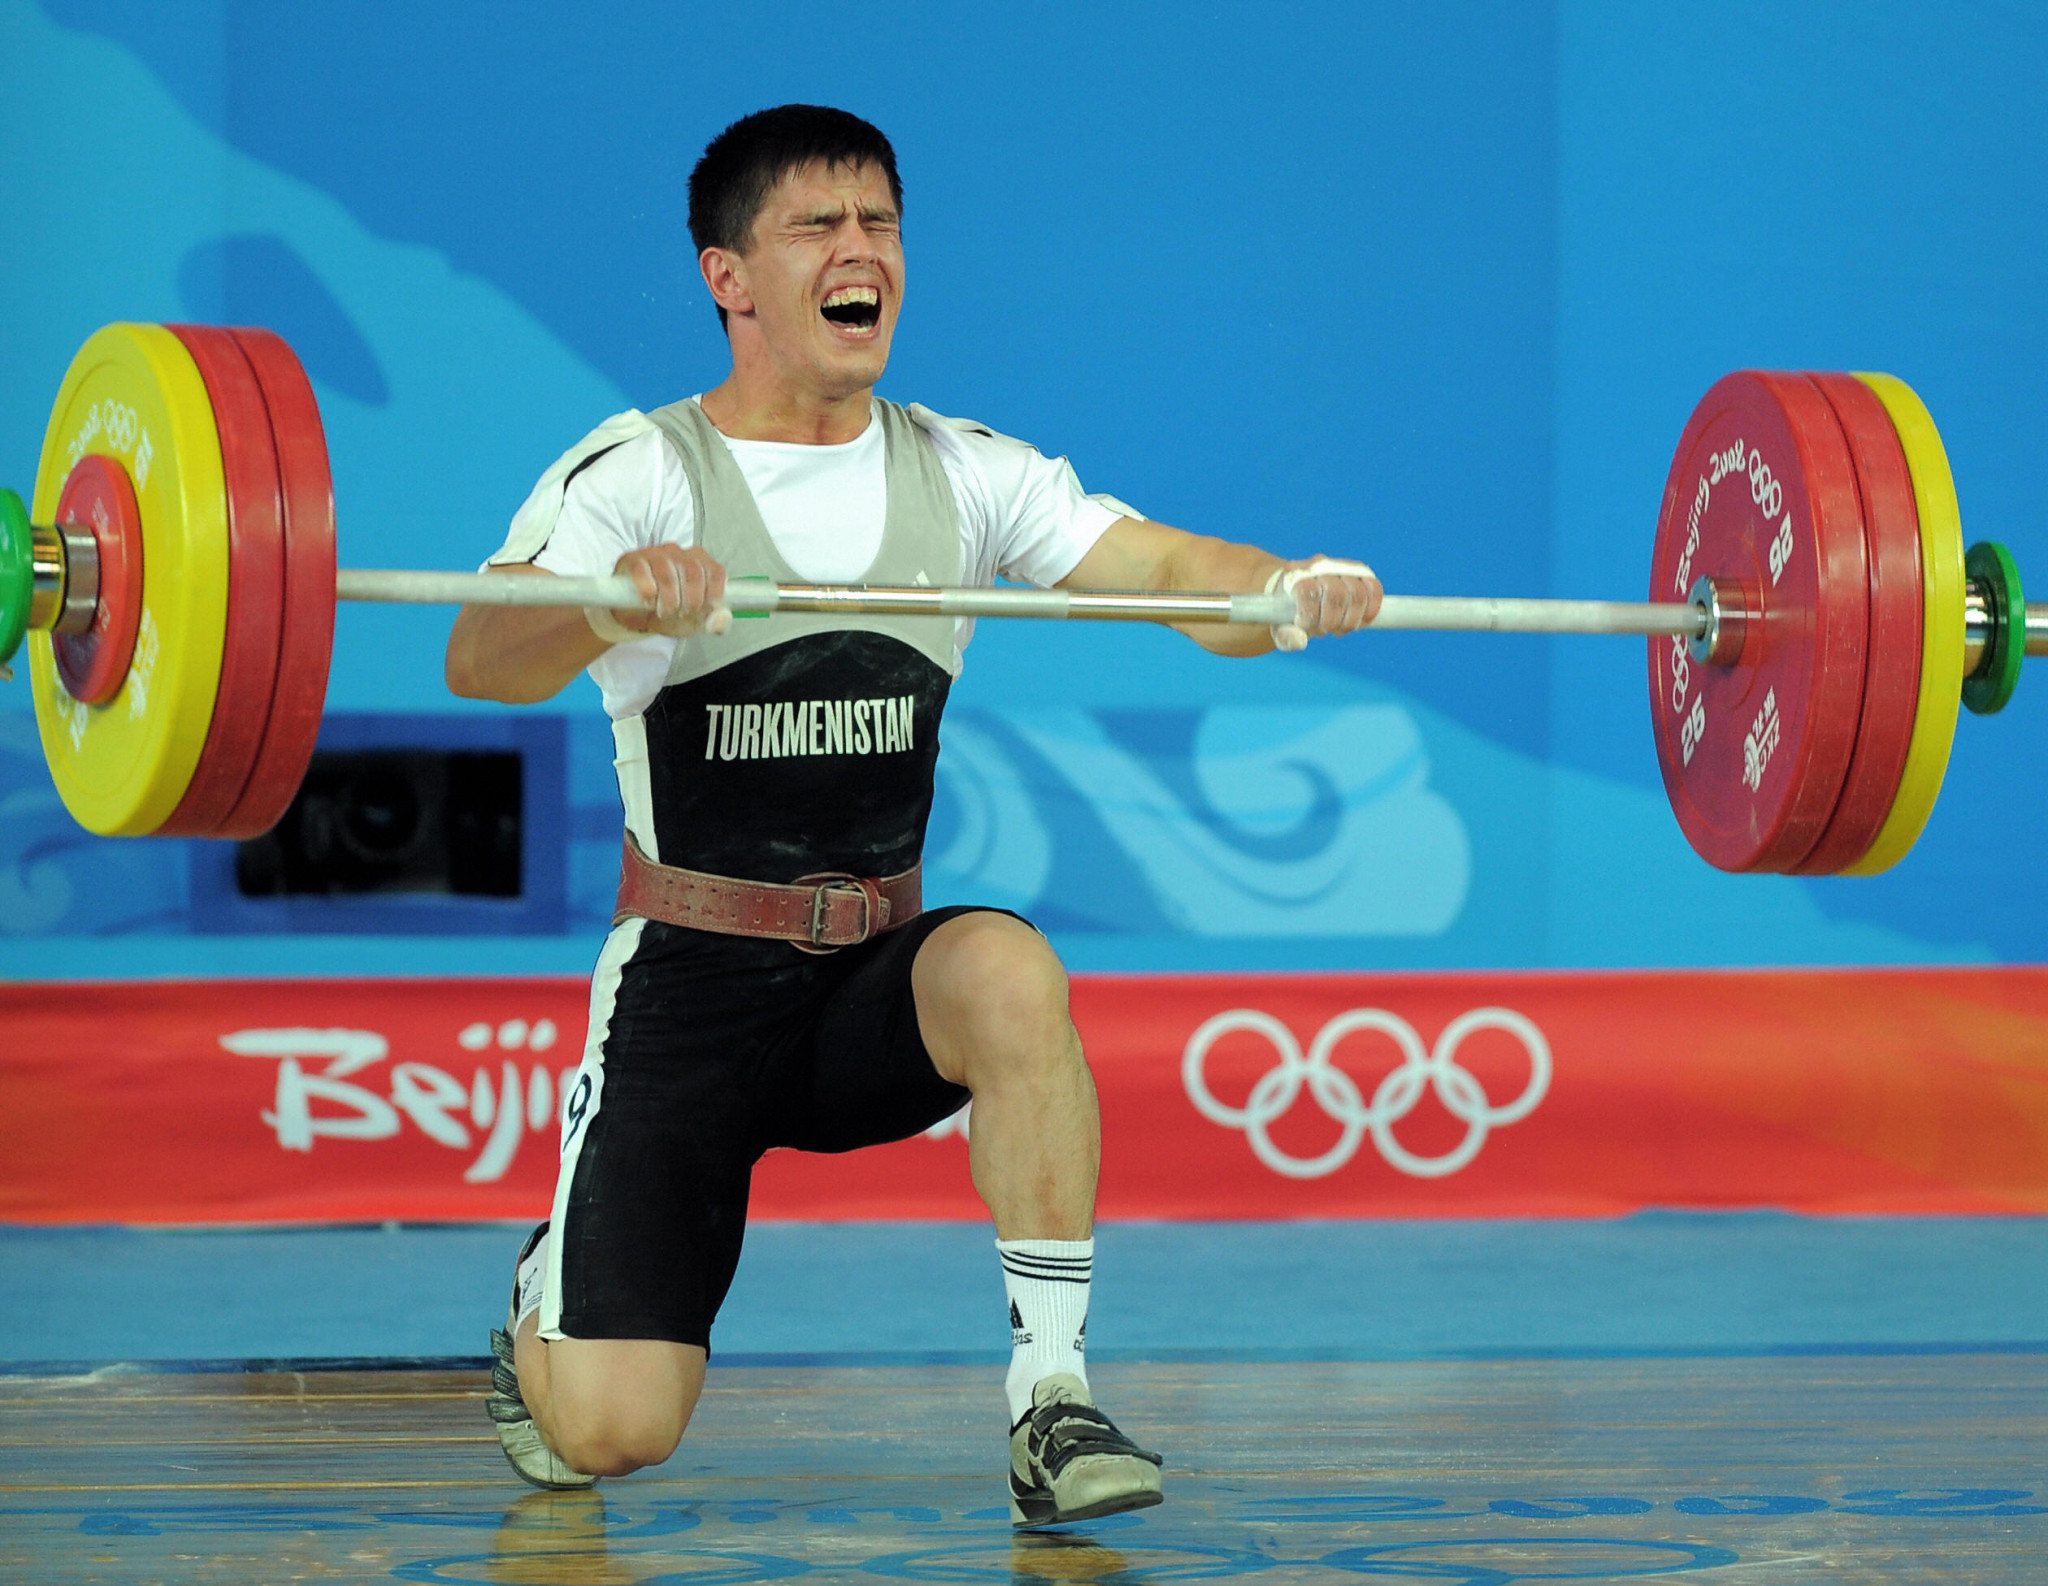 Umurbek Bazarbayev lifted at four Olympic Games  ©Getty Images